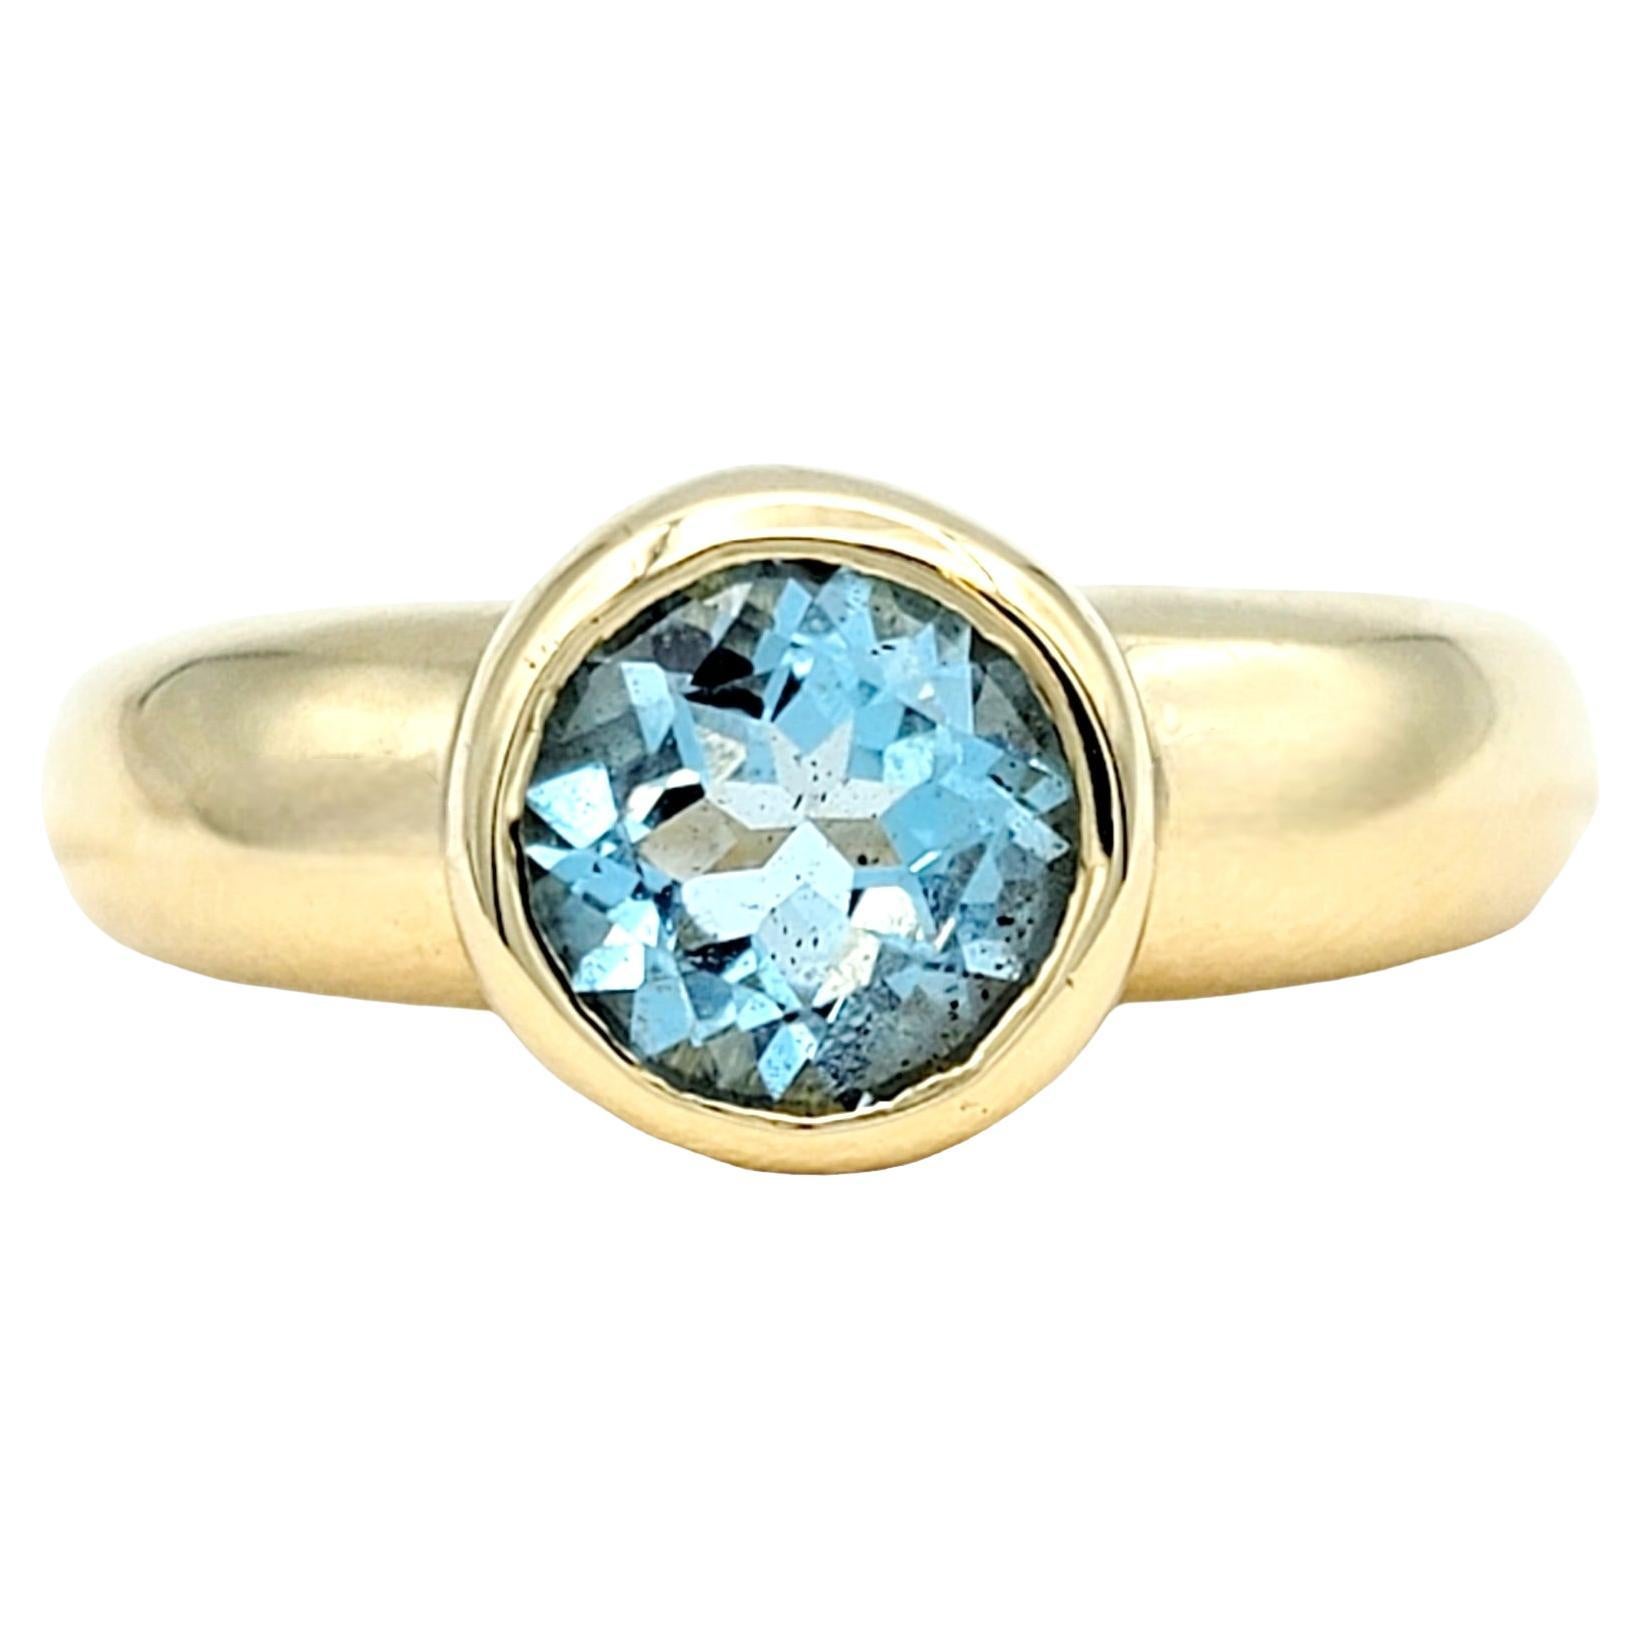 Round Bezel Set Blue Topaz Solitaire Band Ring in Polished 14 Karat Yellow Gold